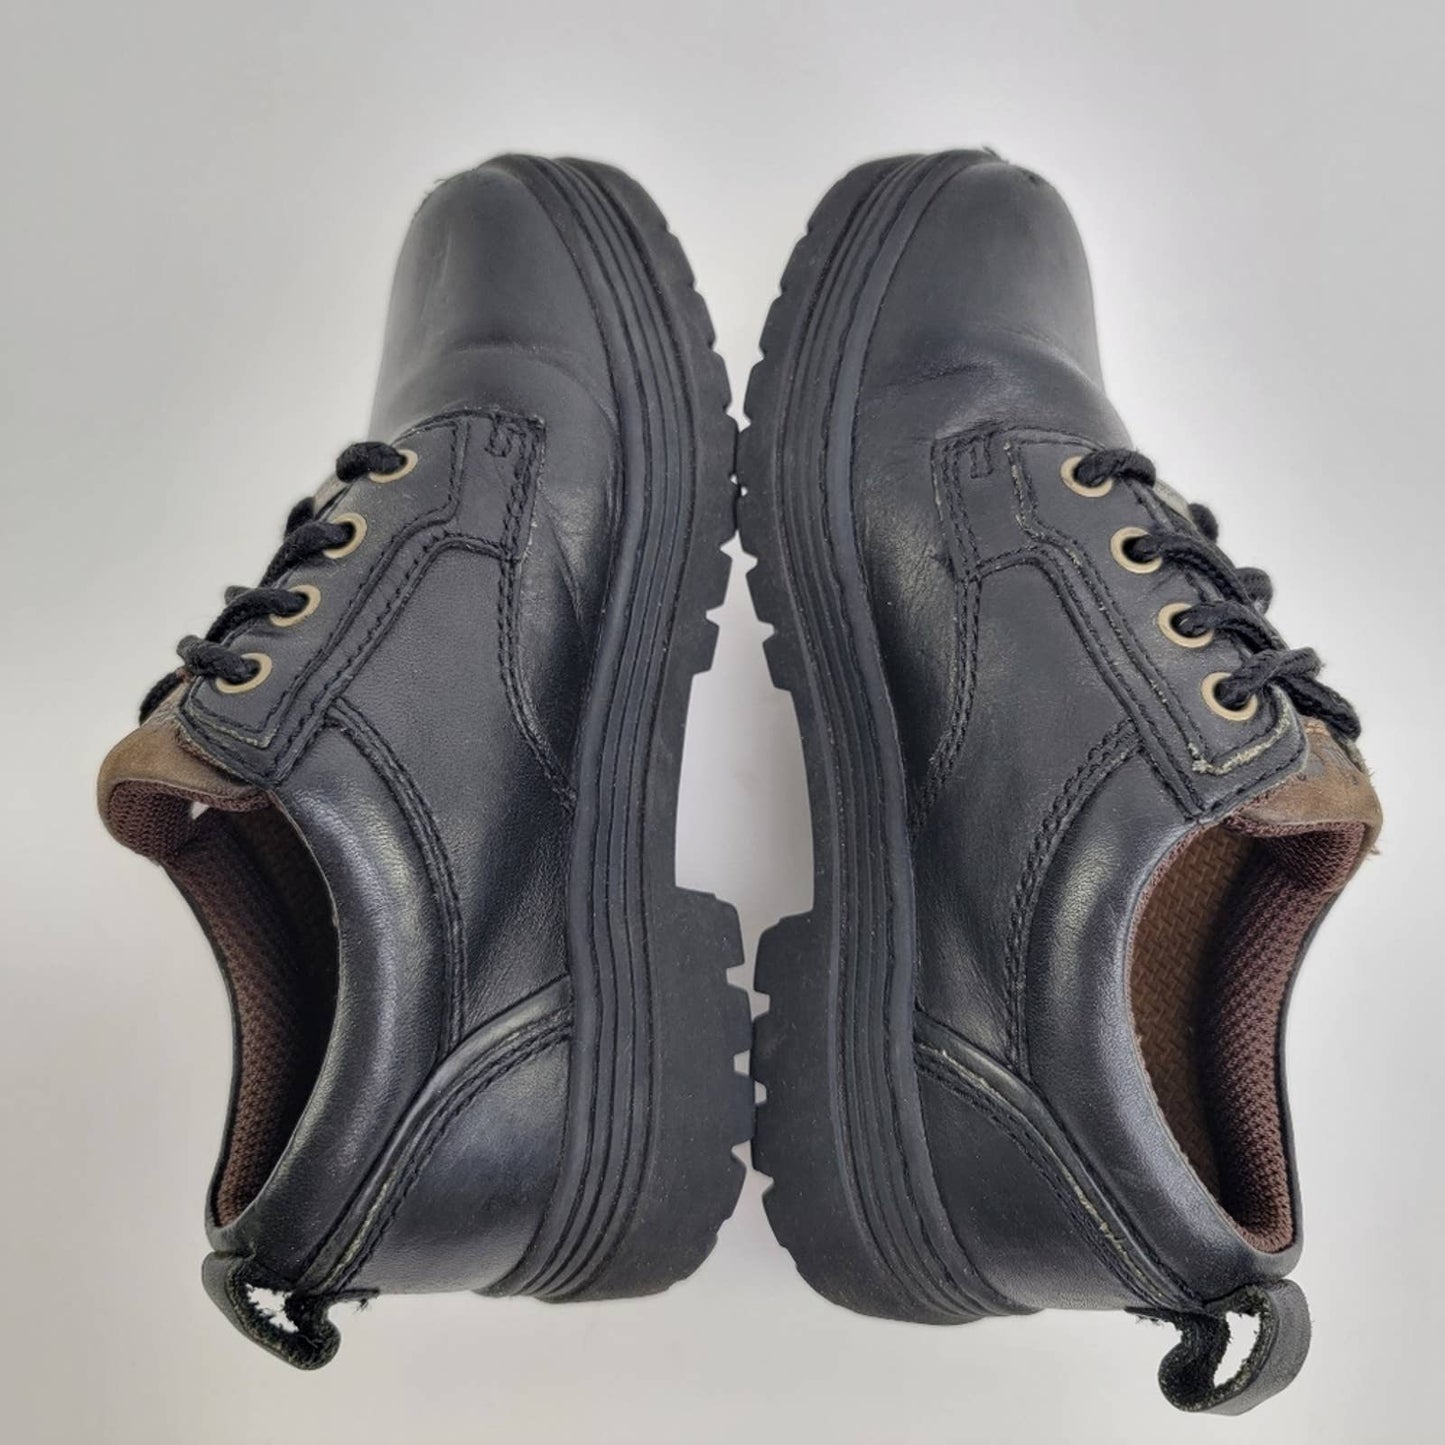 Timberland Black Leather Lace Up Oxford Shoes - 1.5C